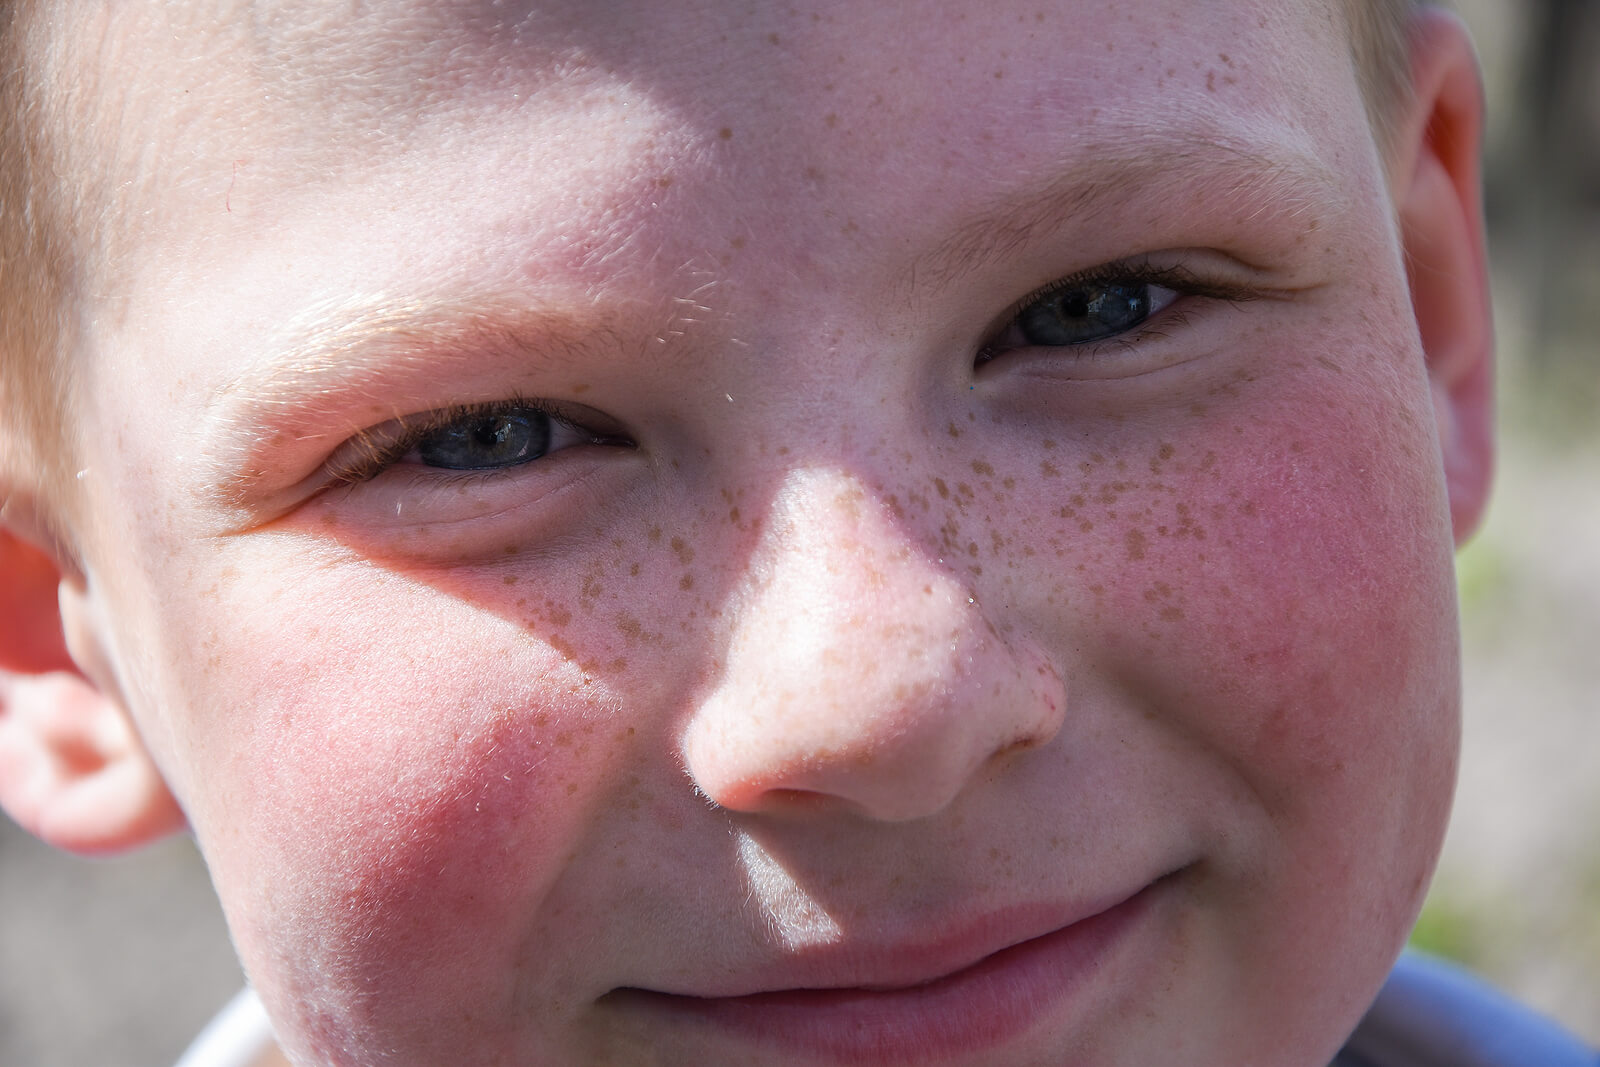 A young boy with freckles and pink cheeks.